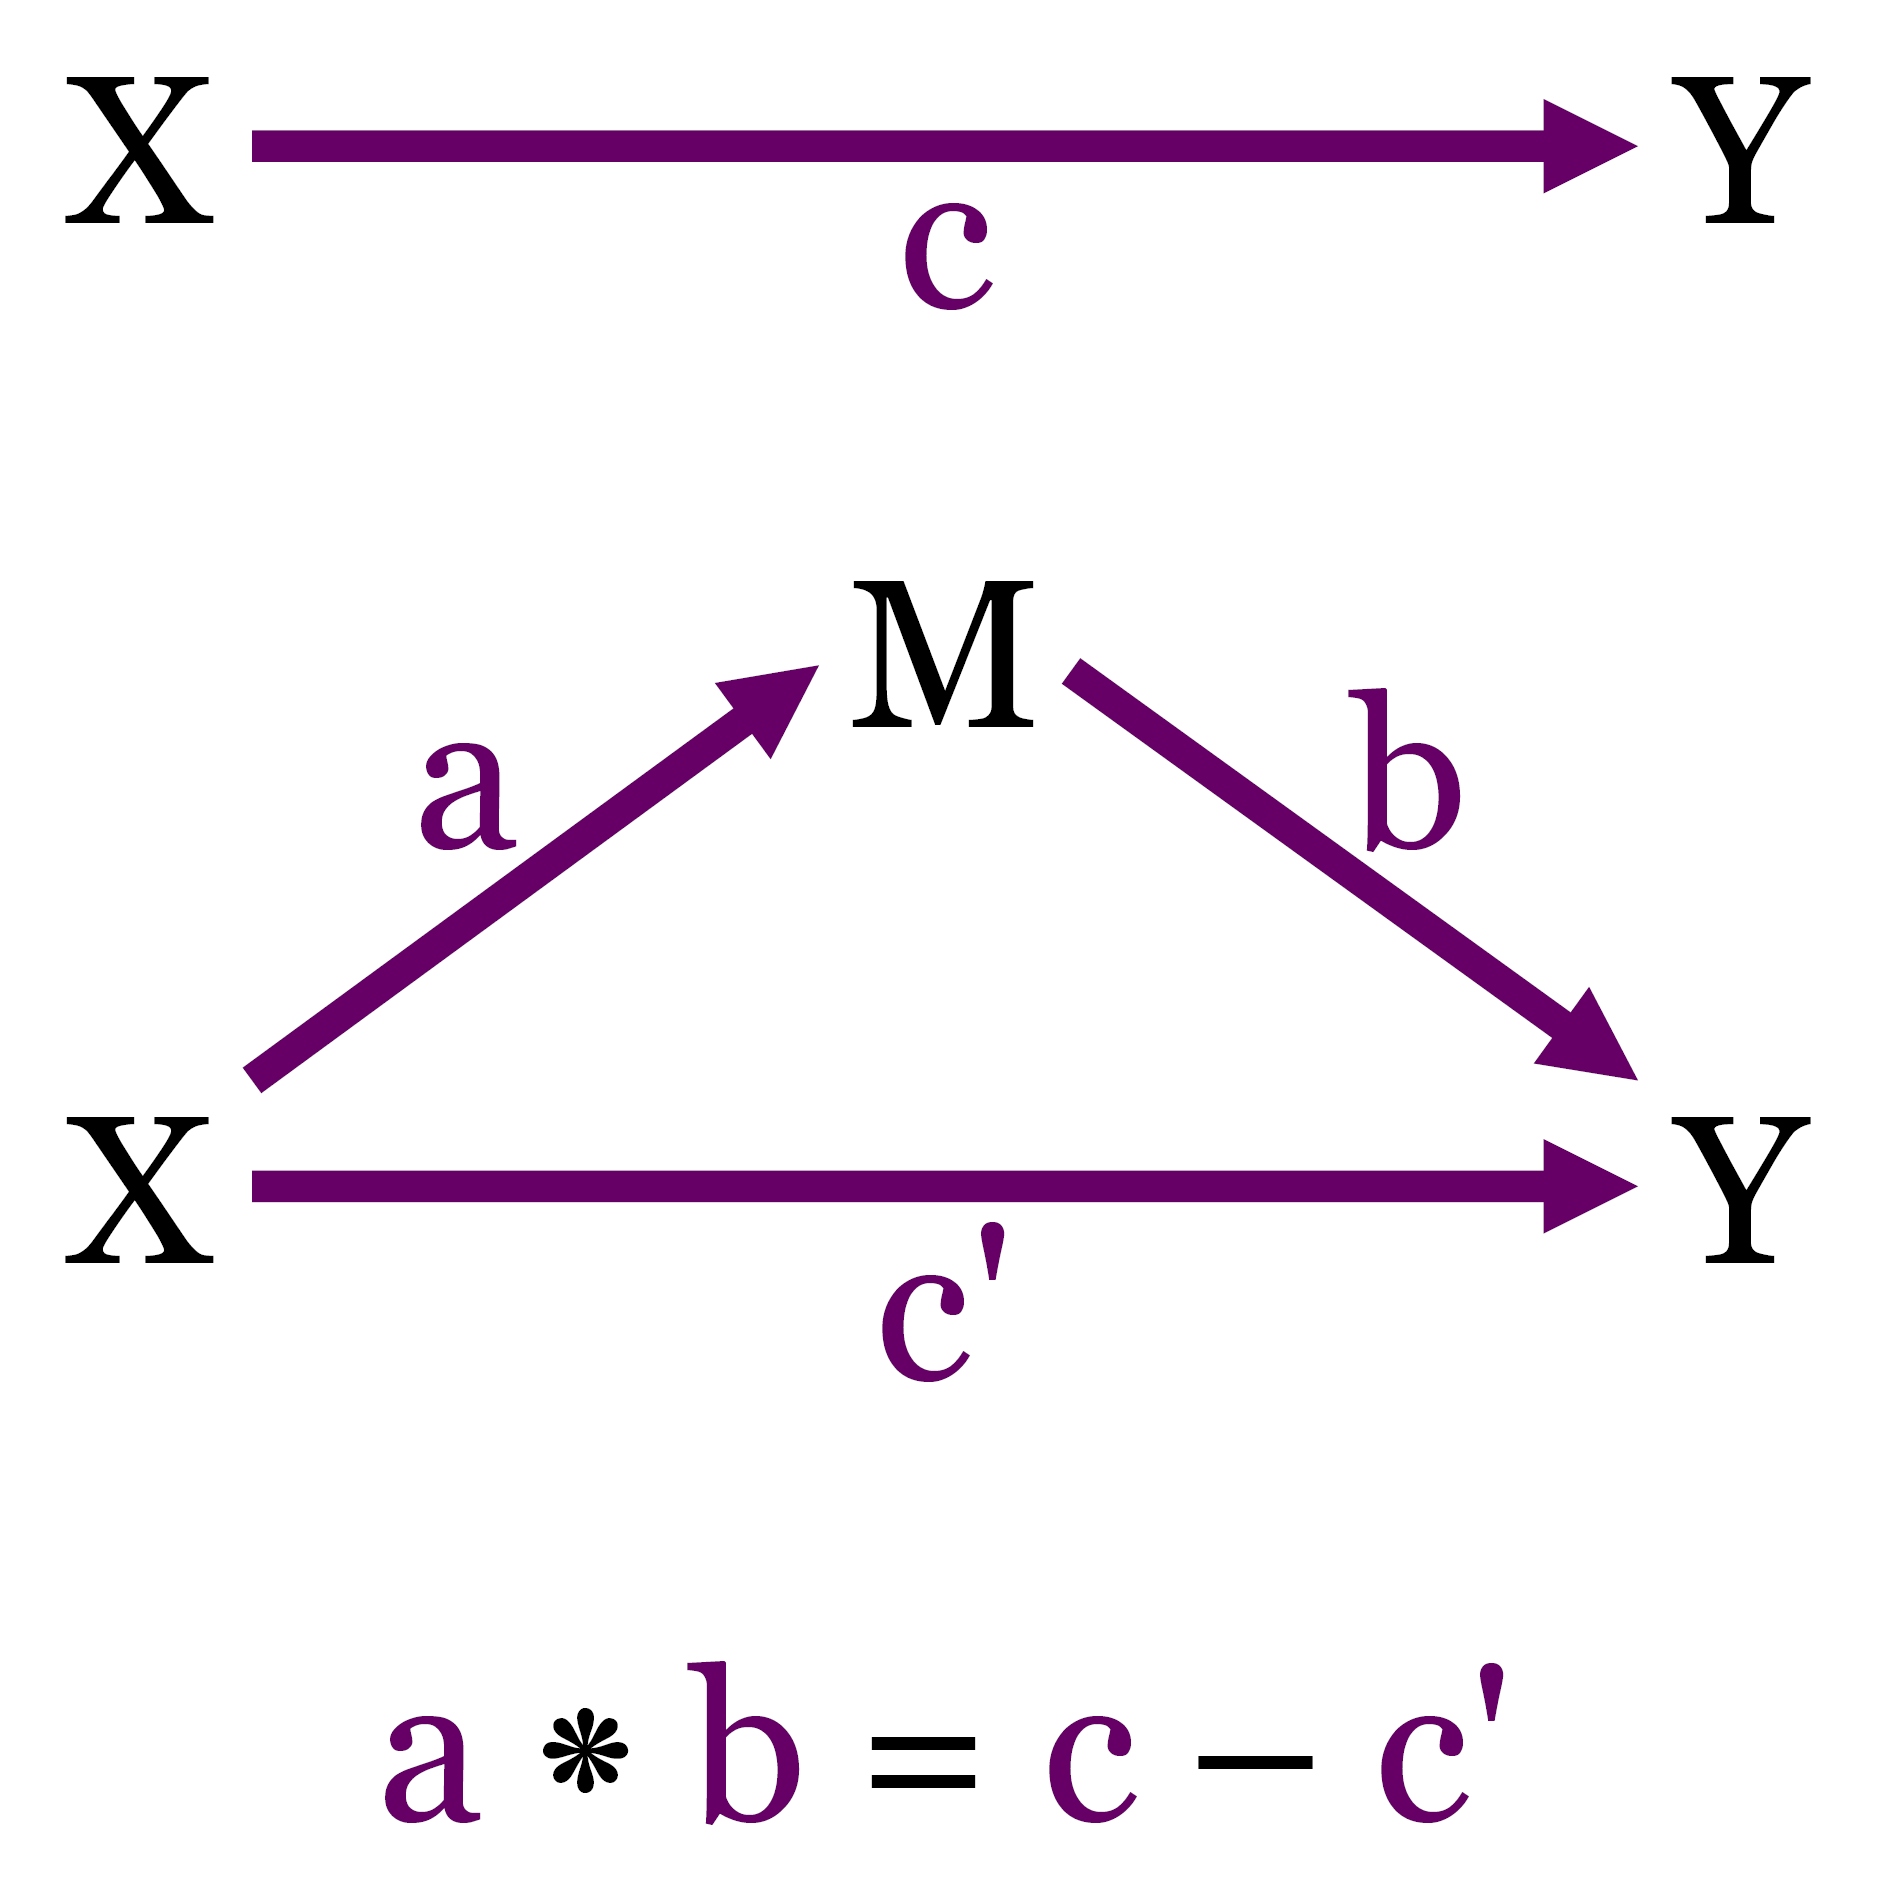 Example mediation diagram with three parts. The top part shows an arrow from X to Y, labeled c. The middle part is a triangle of arrows: from X to M (labeled a), from X to Y (labeled c'), and from M to Y (labeled b). The bottom part is an equation: a * b = c - c'.